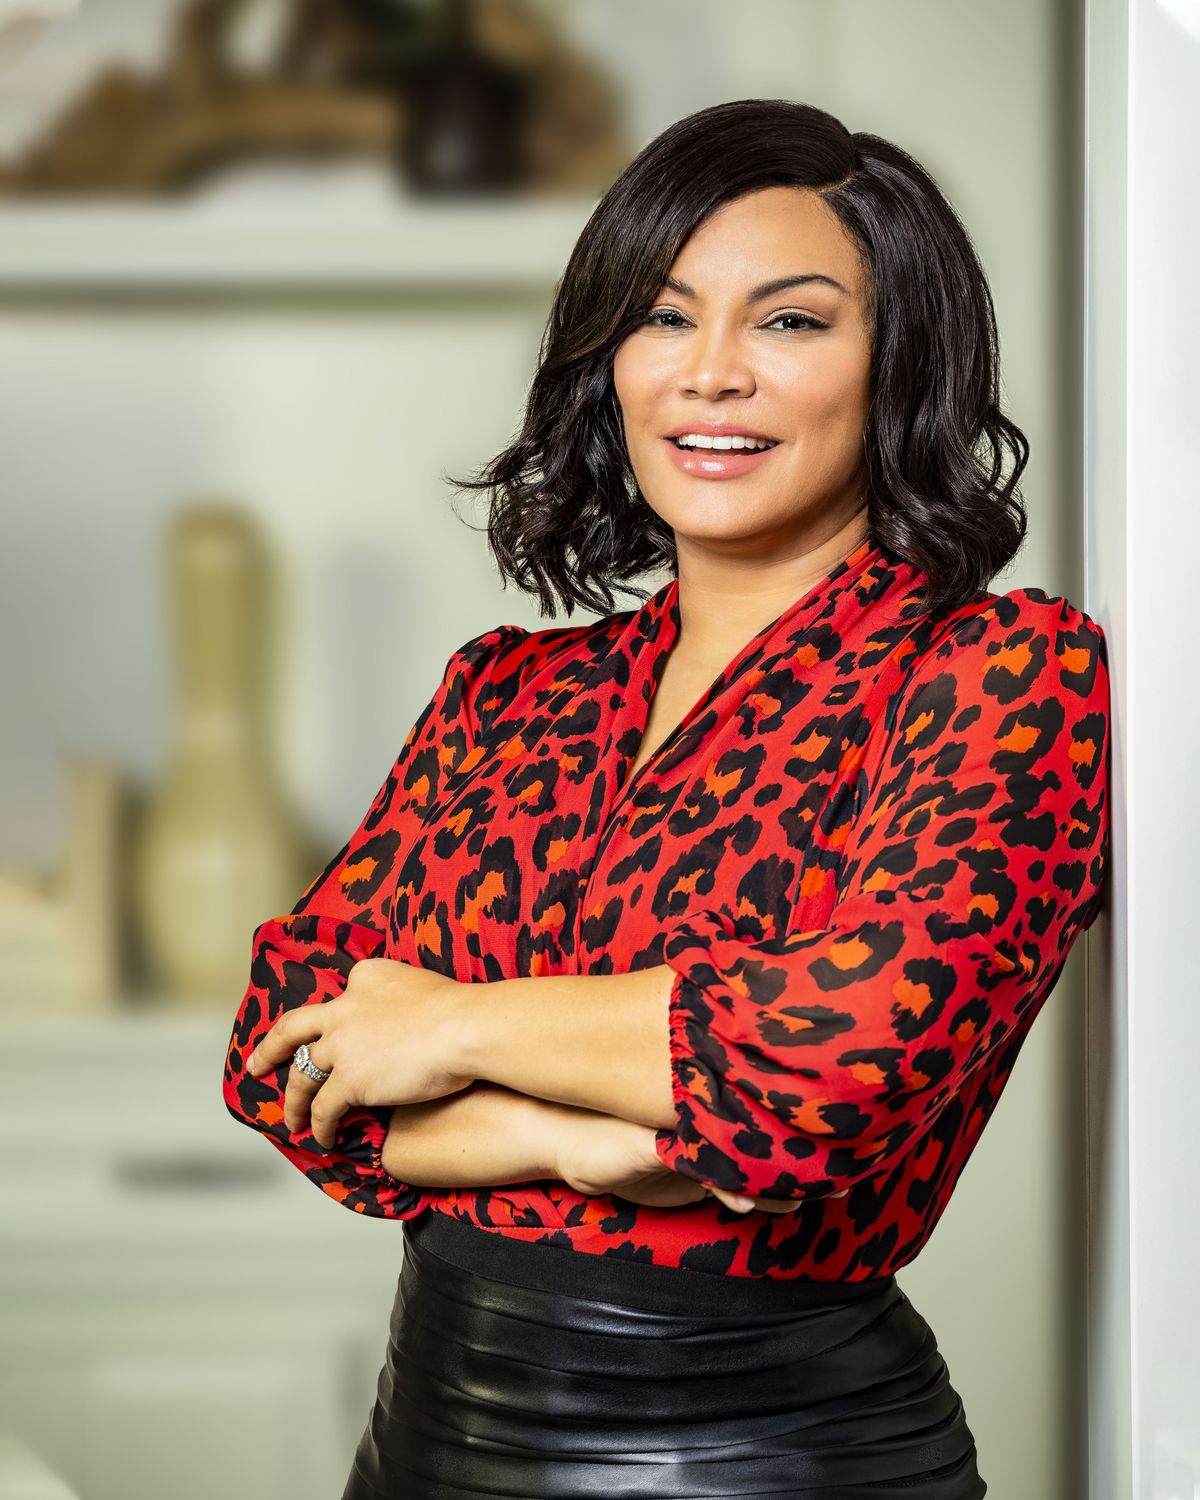 Egypt Sherrod 9 Surprising Things About The Hgtv And Own Star